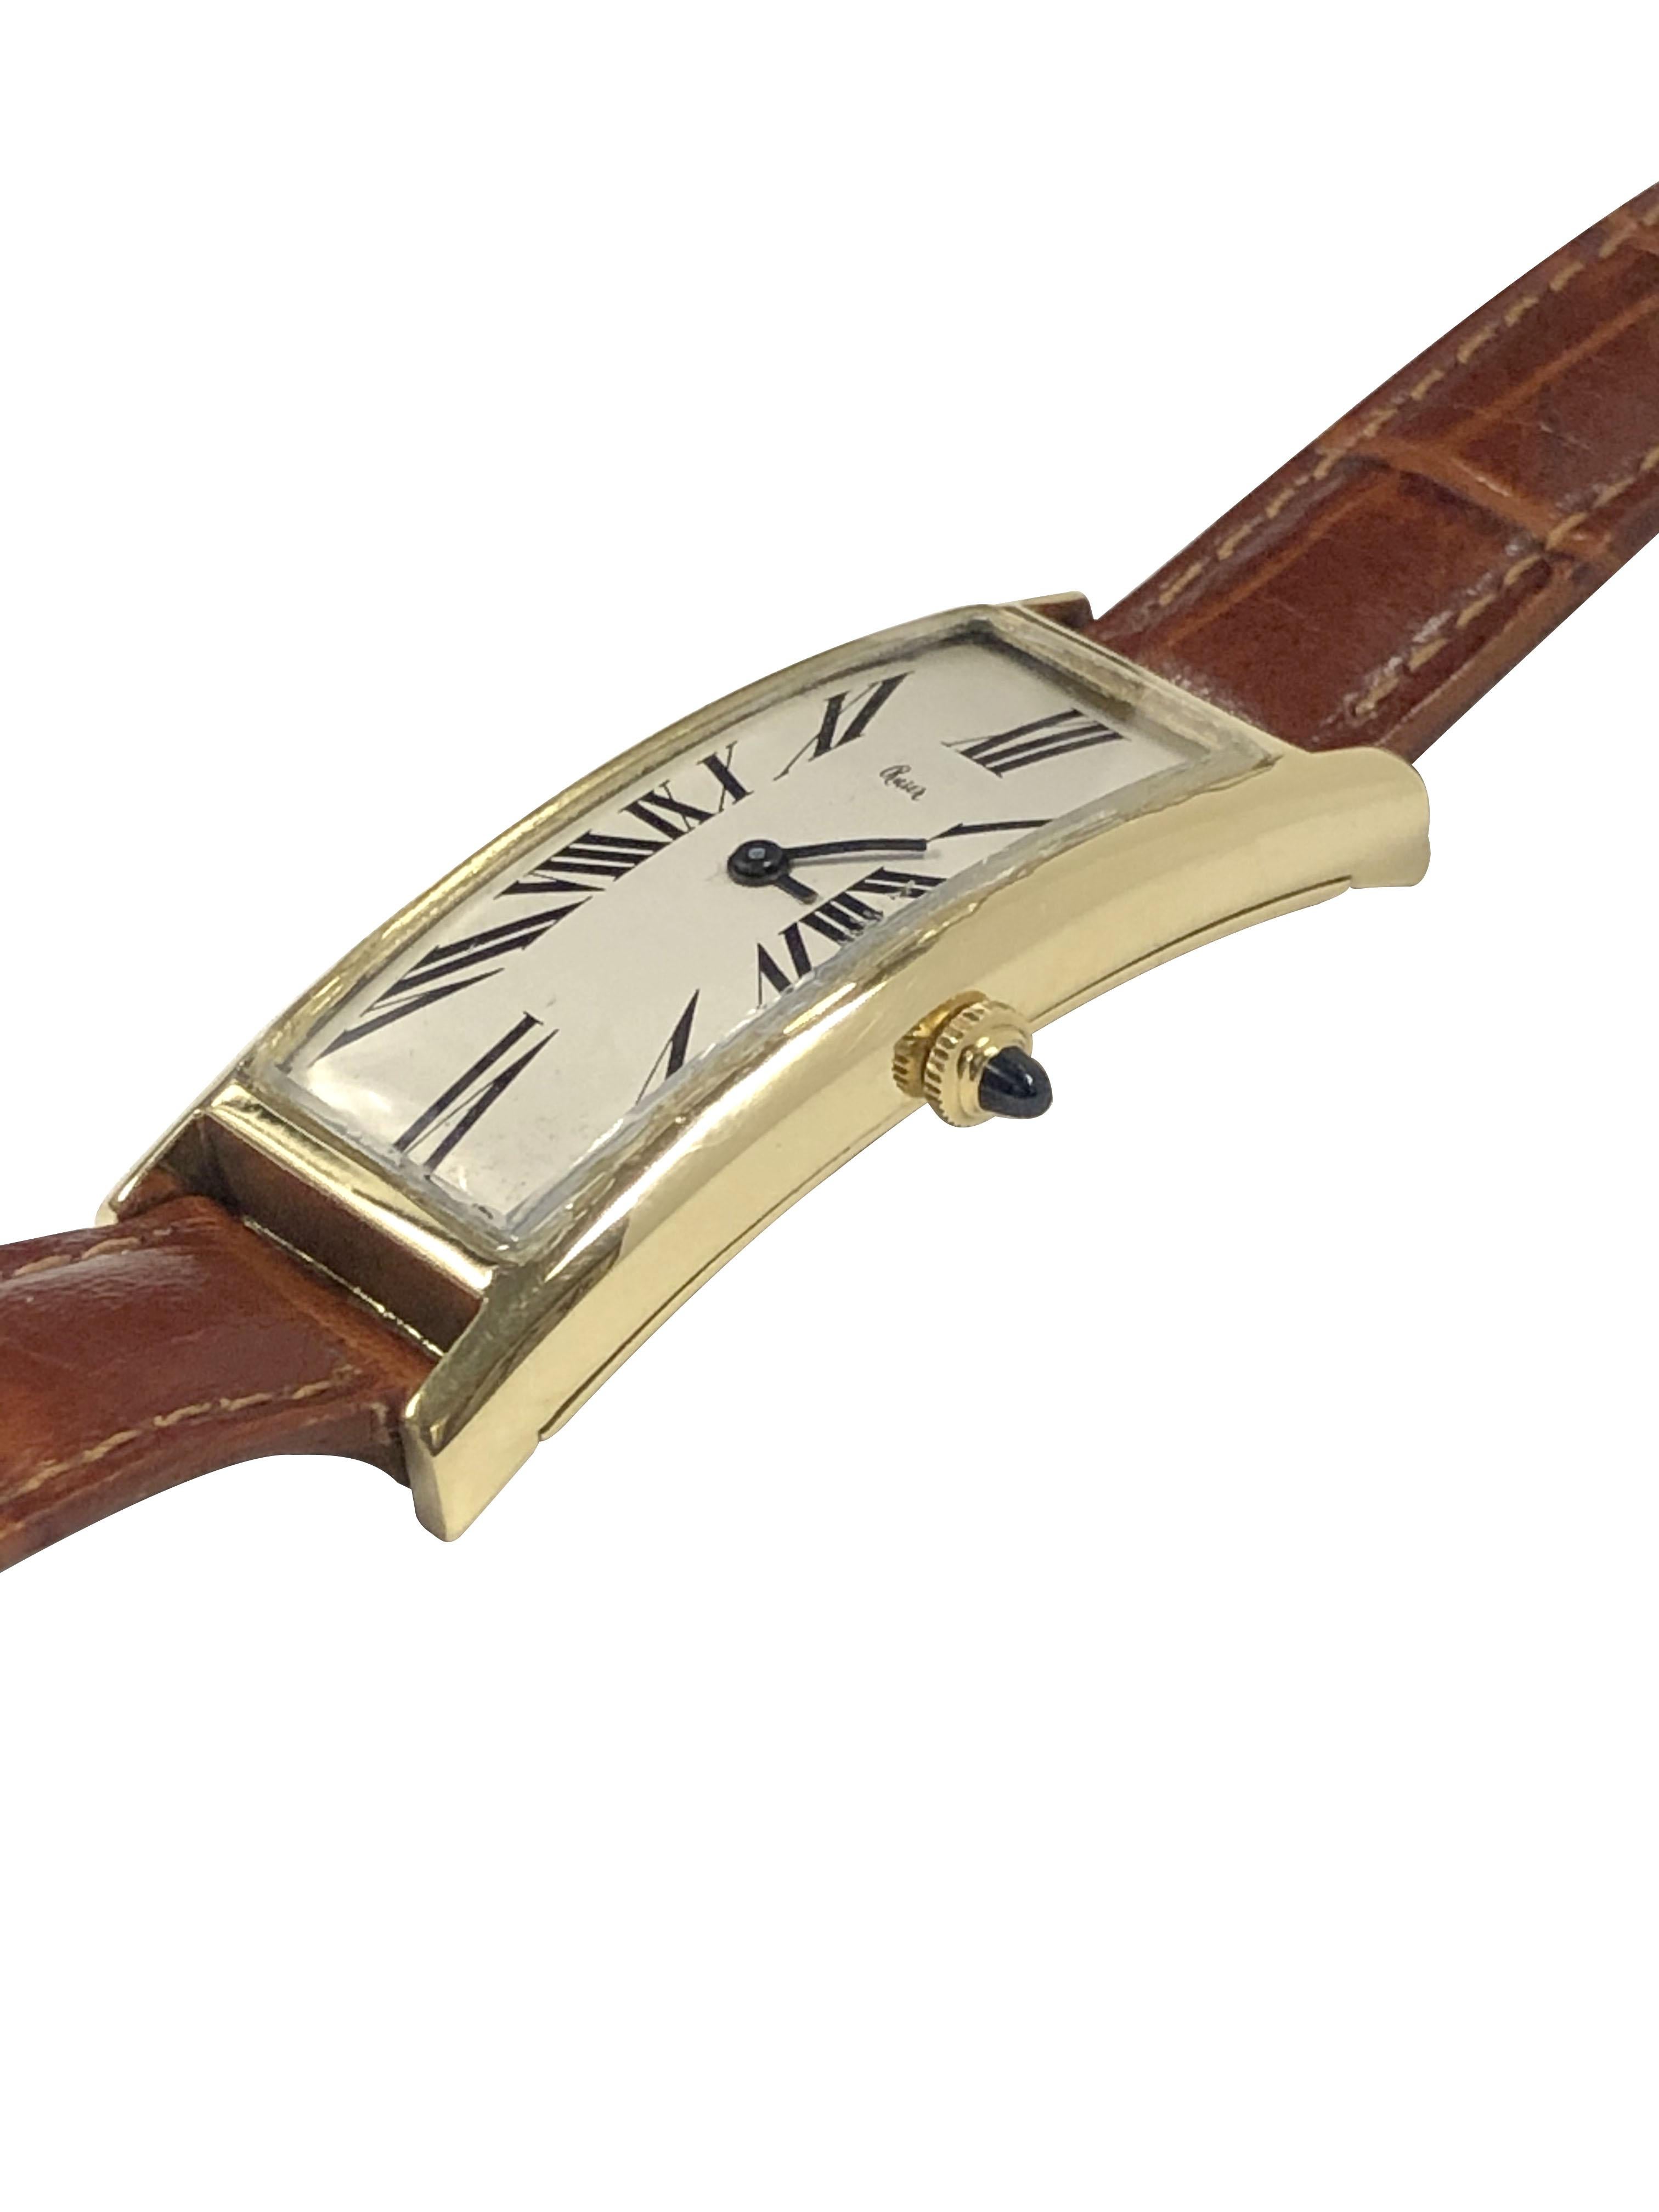 Circa 1960s Bueche Girod Retailed by Ruser Wrist Watch, owned and worn by Hollywood Icon Jerry Lewis, 43 M.M. Lug end to end X 17 M.M. 18K Yellow Gold 2 Piece Curved case, 17 Jewel, Mechanical, manual wind movement, Sapphire Crown, White dial with